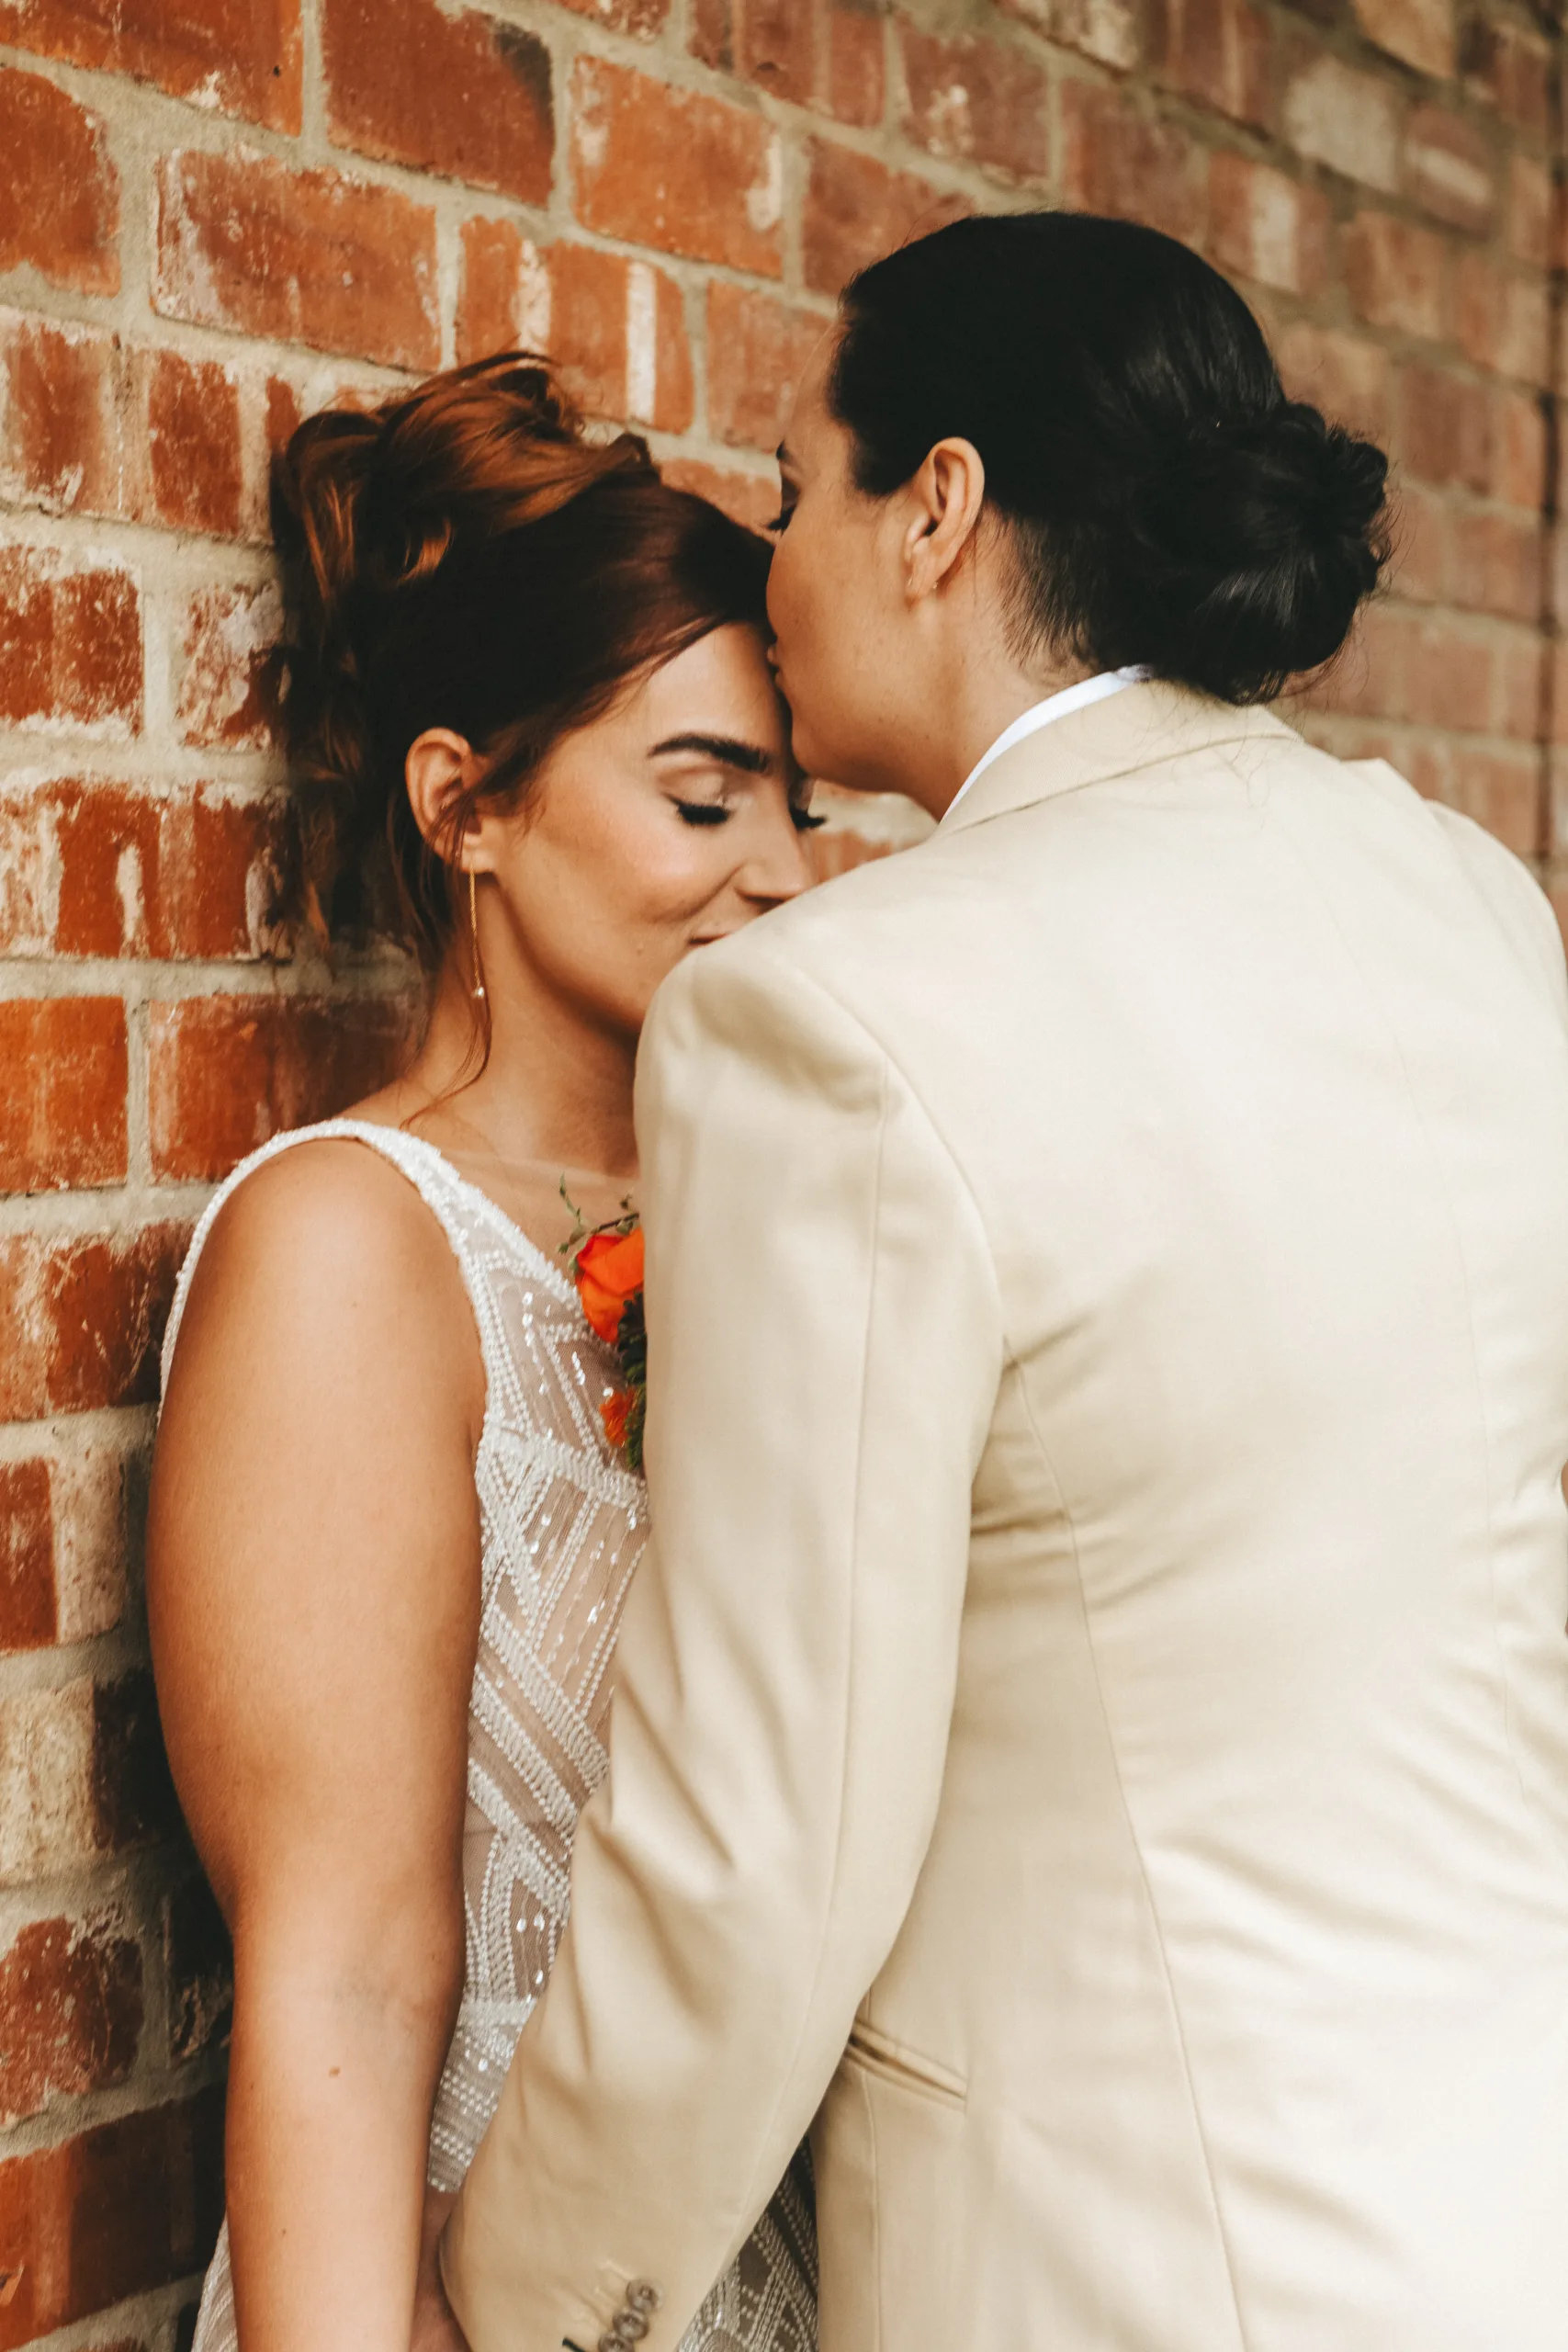 A bride and groom kiss in front of a brick wall during their wedding.